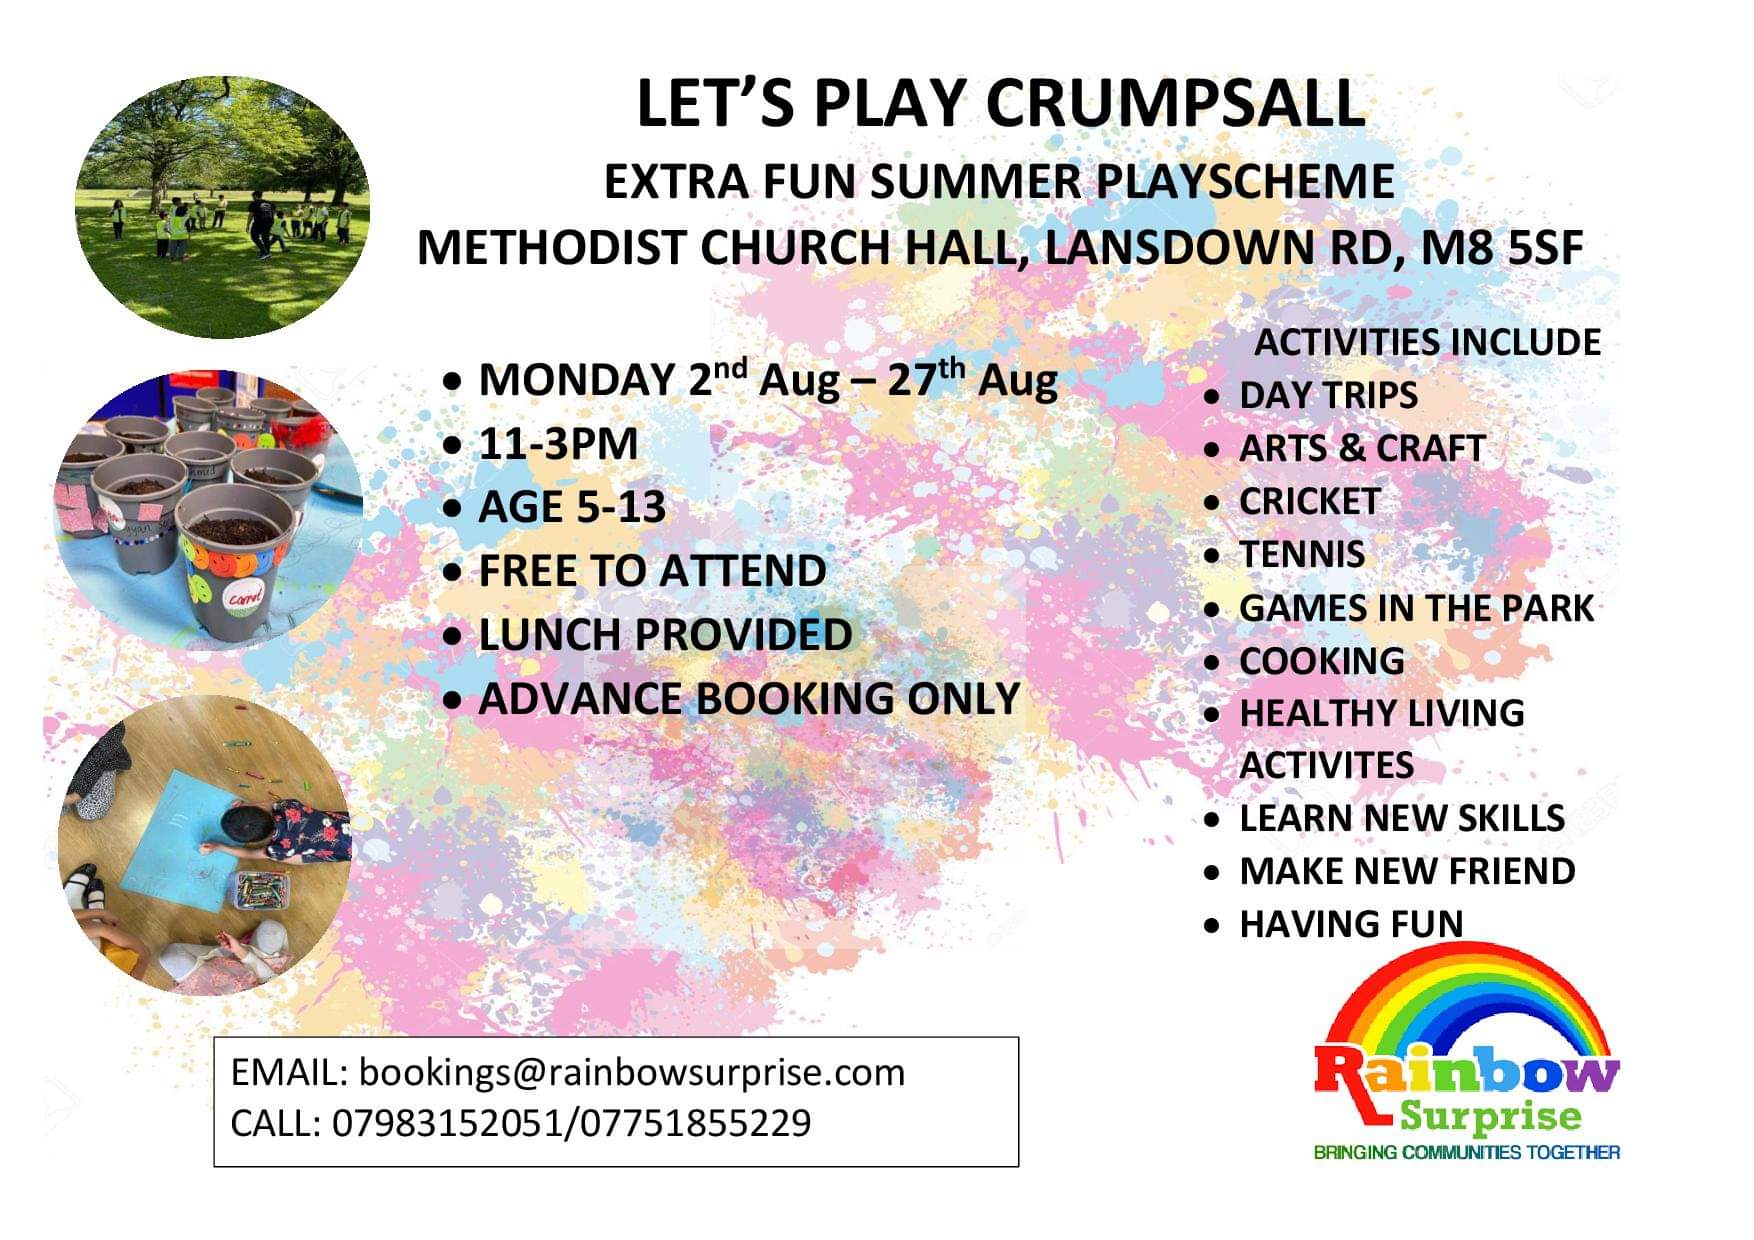 Let's Play Crumpsall